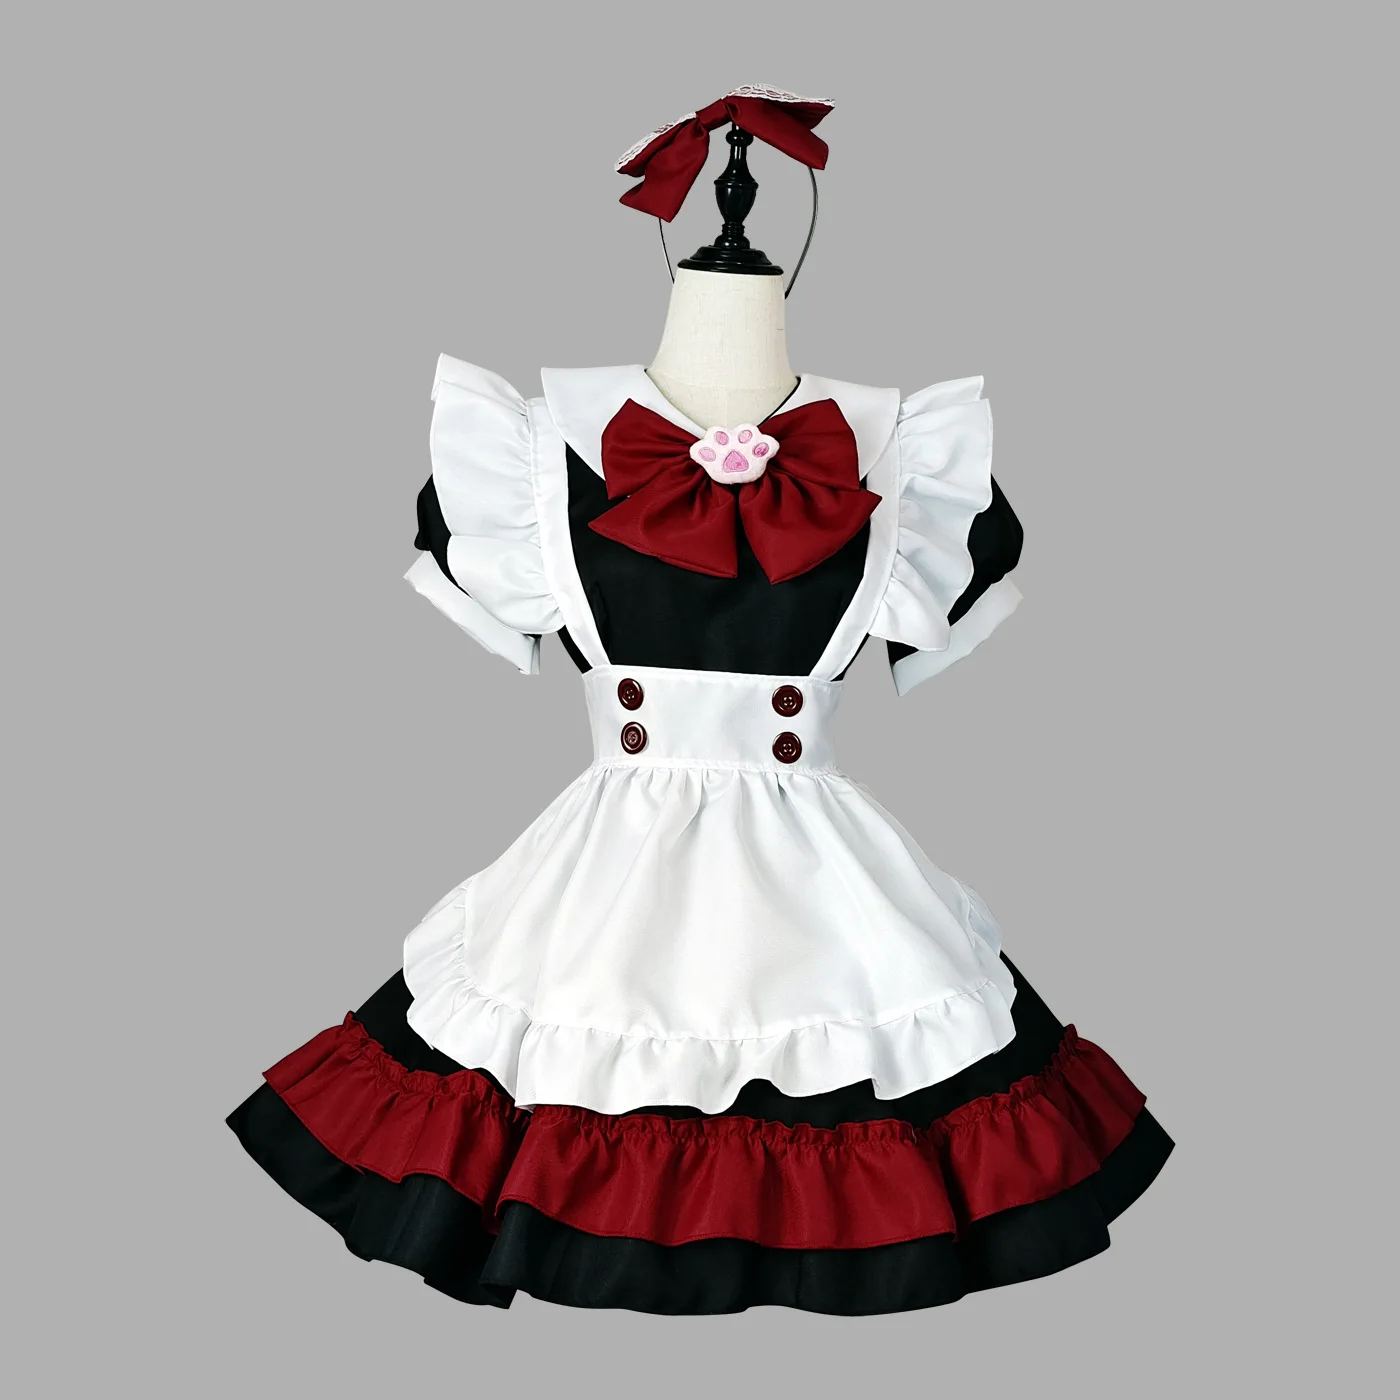 Christmas Costumes Vampire Little Devil Maid Lolita Uniform Gothic Black and Red Anime Maid Sweet Outfit Goth Cosplay Costume